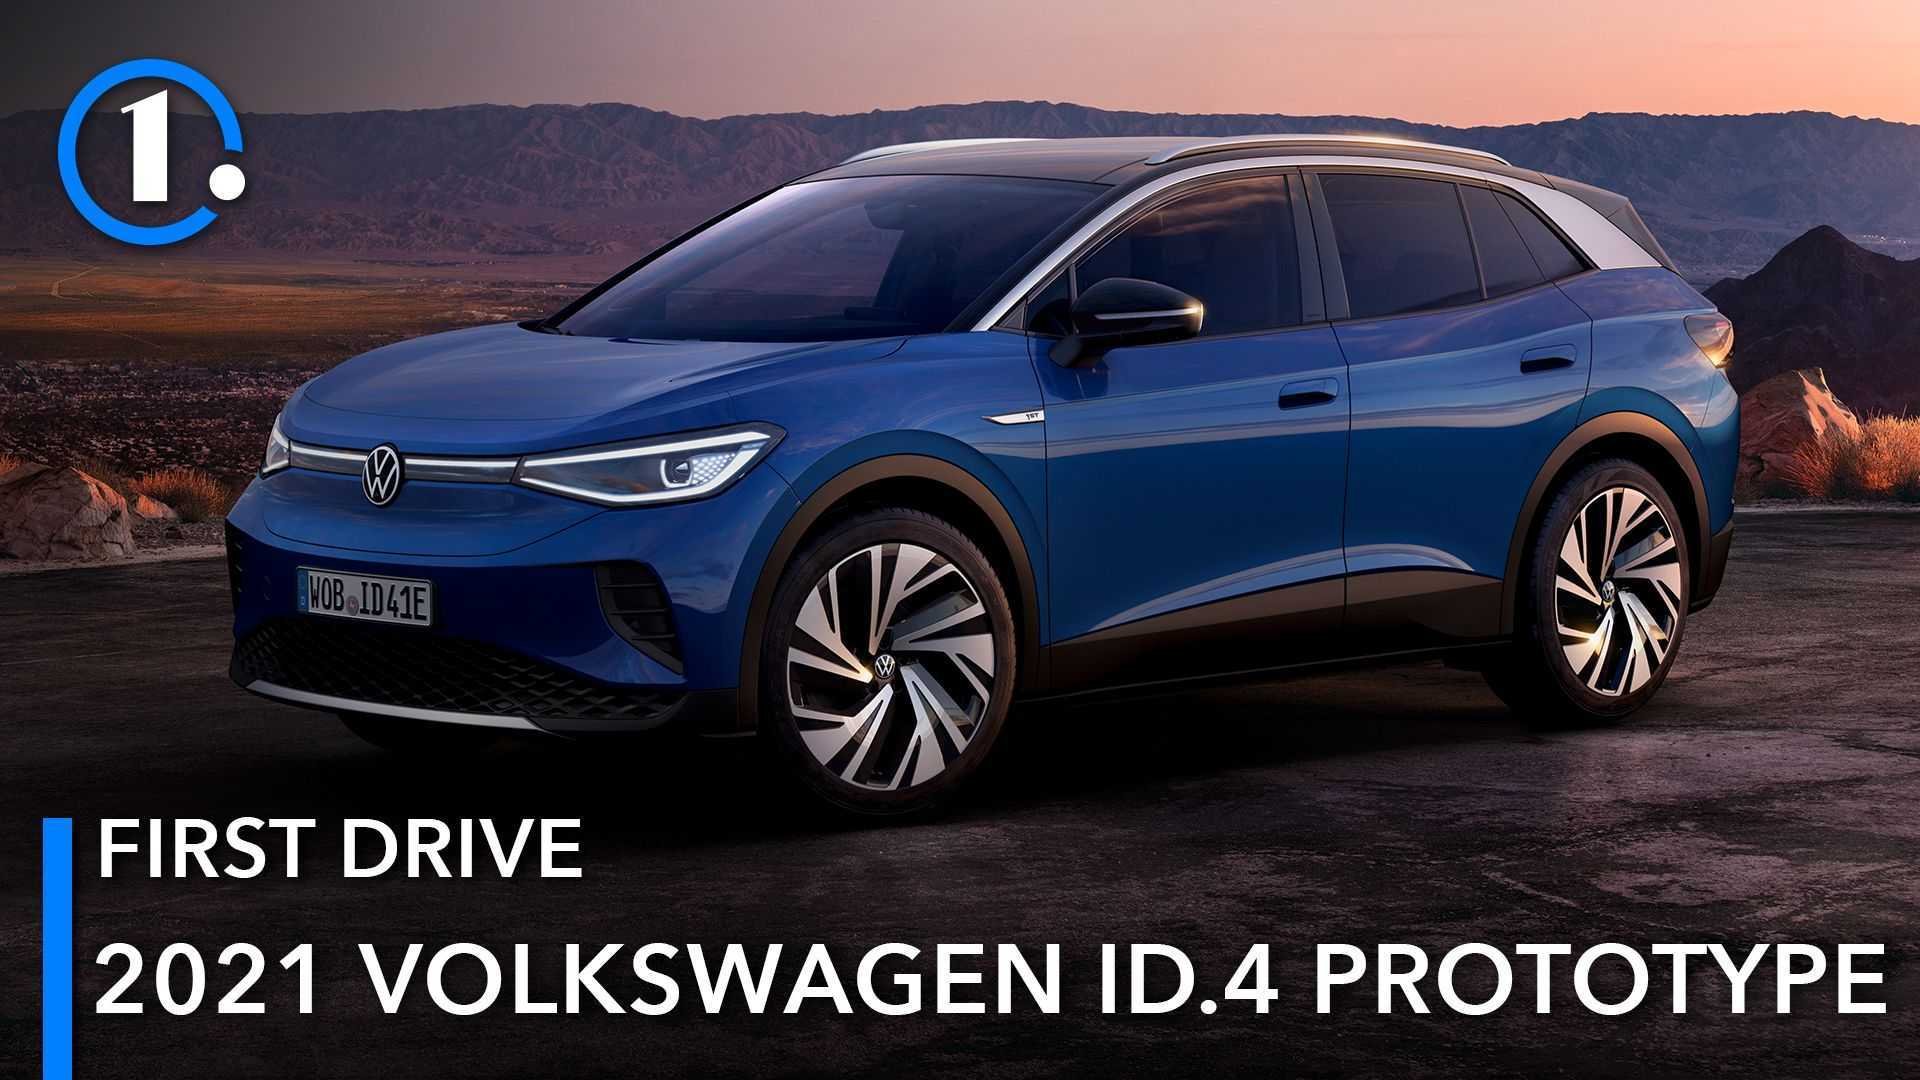 2021 Volkswagen ID.4 Prototype First Drive Review: Just Plain Good